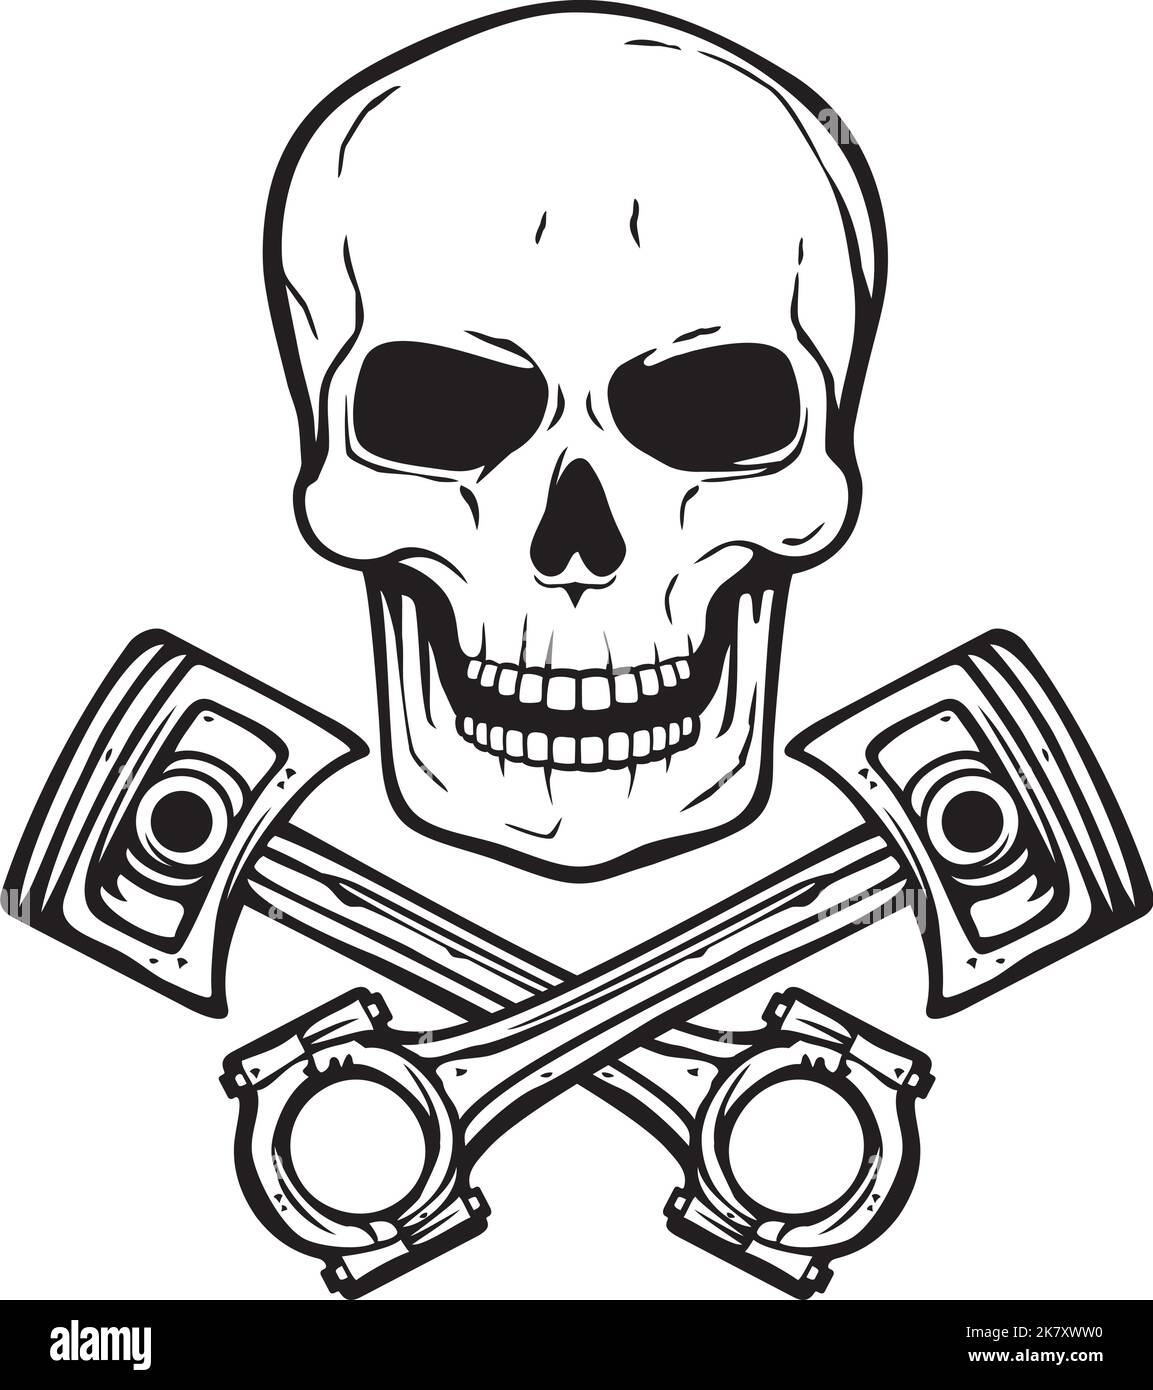 Vintage Skull With Crossed Piston And Motorcycle Gear Emblem Biker Club Or  Motorcycles Workshop Design Element Vector Illustration In Engraving  Style Royalty Free SVG Cliparts Vectors And Stock Illustration Image  73020092